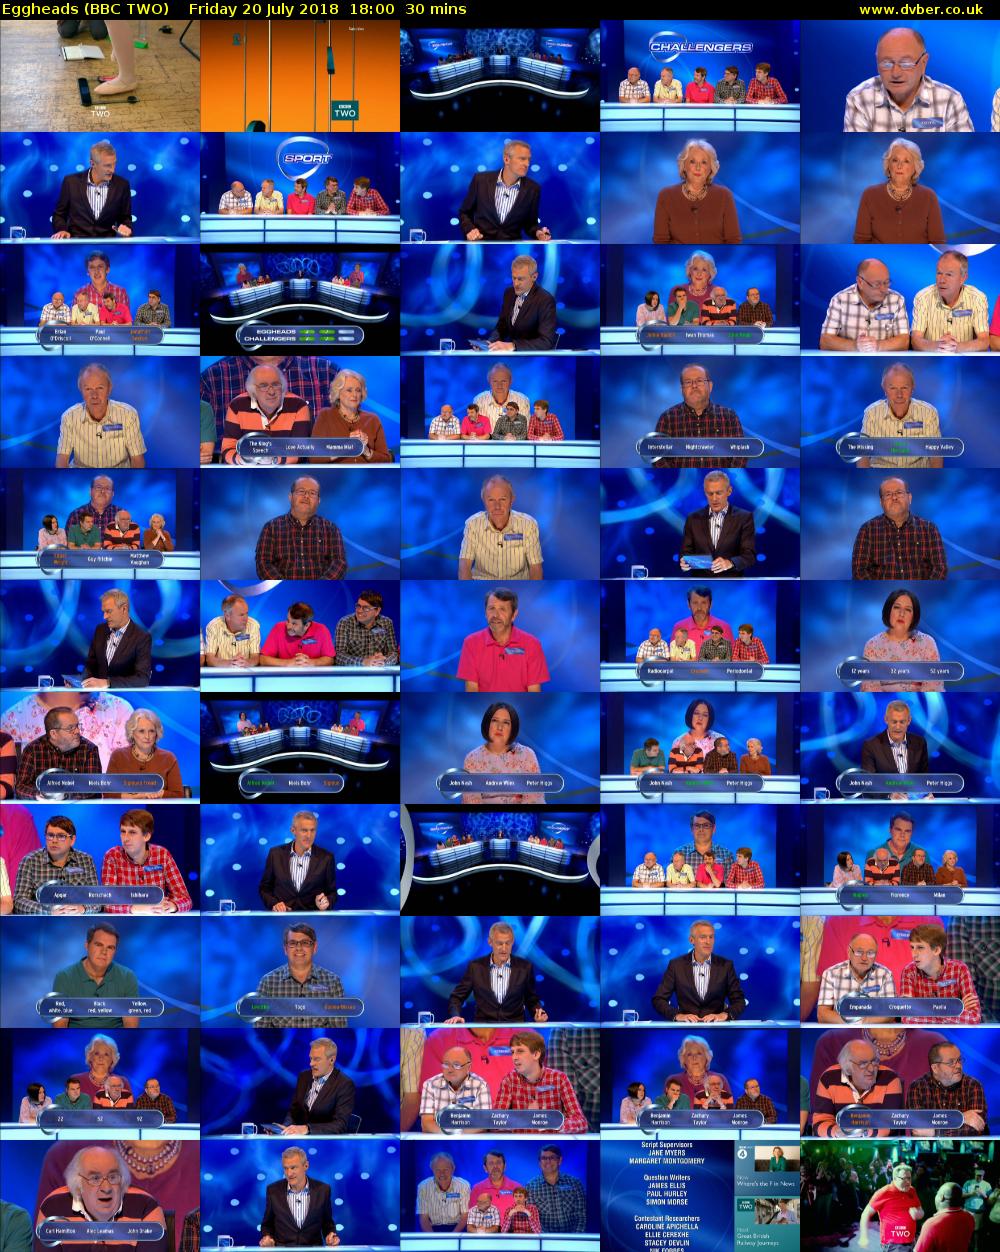 Eggheads (BBC TWO) Friday 20 July 2018 18:00 - 18:30